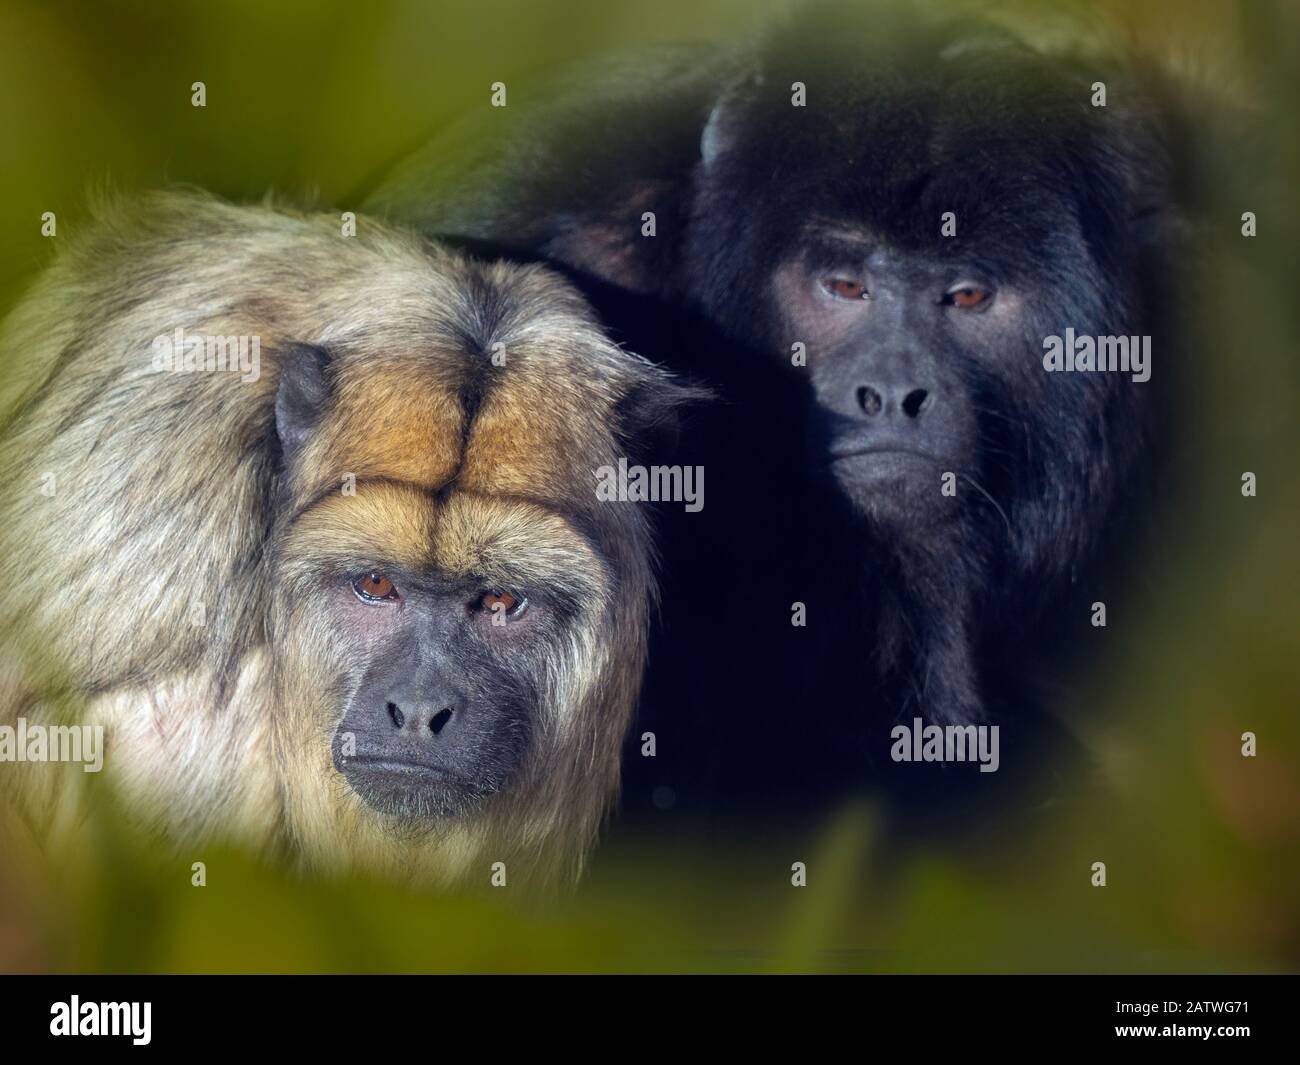 Black howler (Alouatta caraya) male and female, captive, occurs in Brazil and Paraguay. With digitally added leaf pattern. Stock Photo